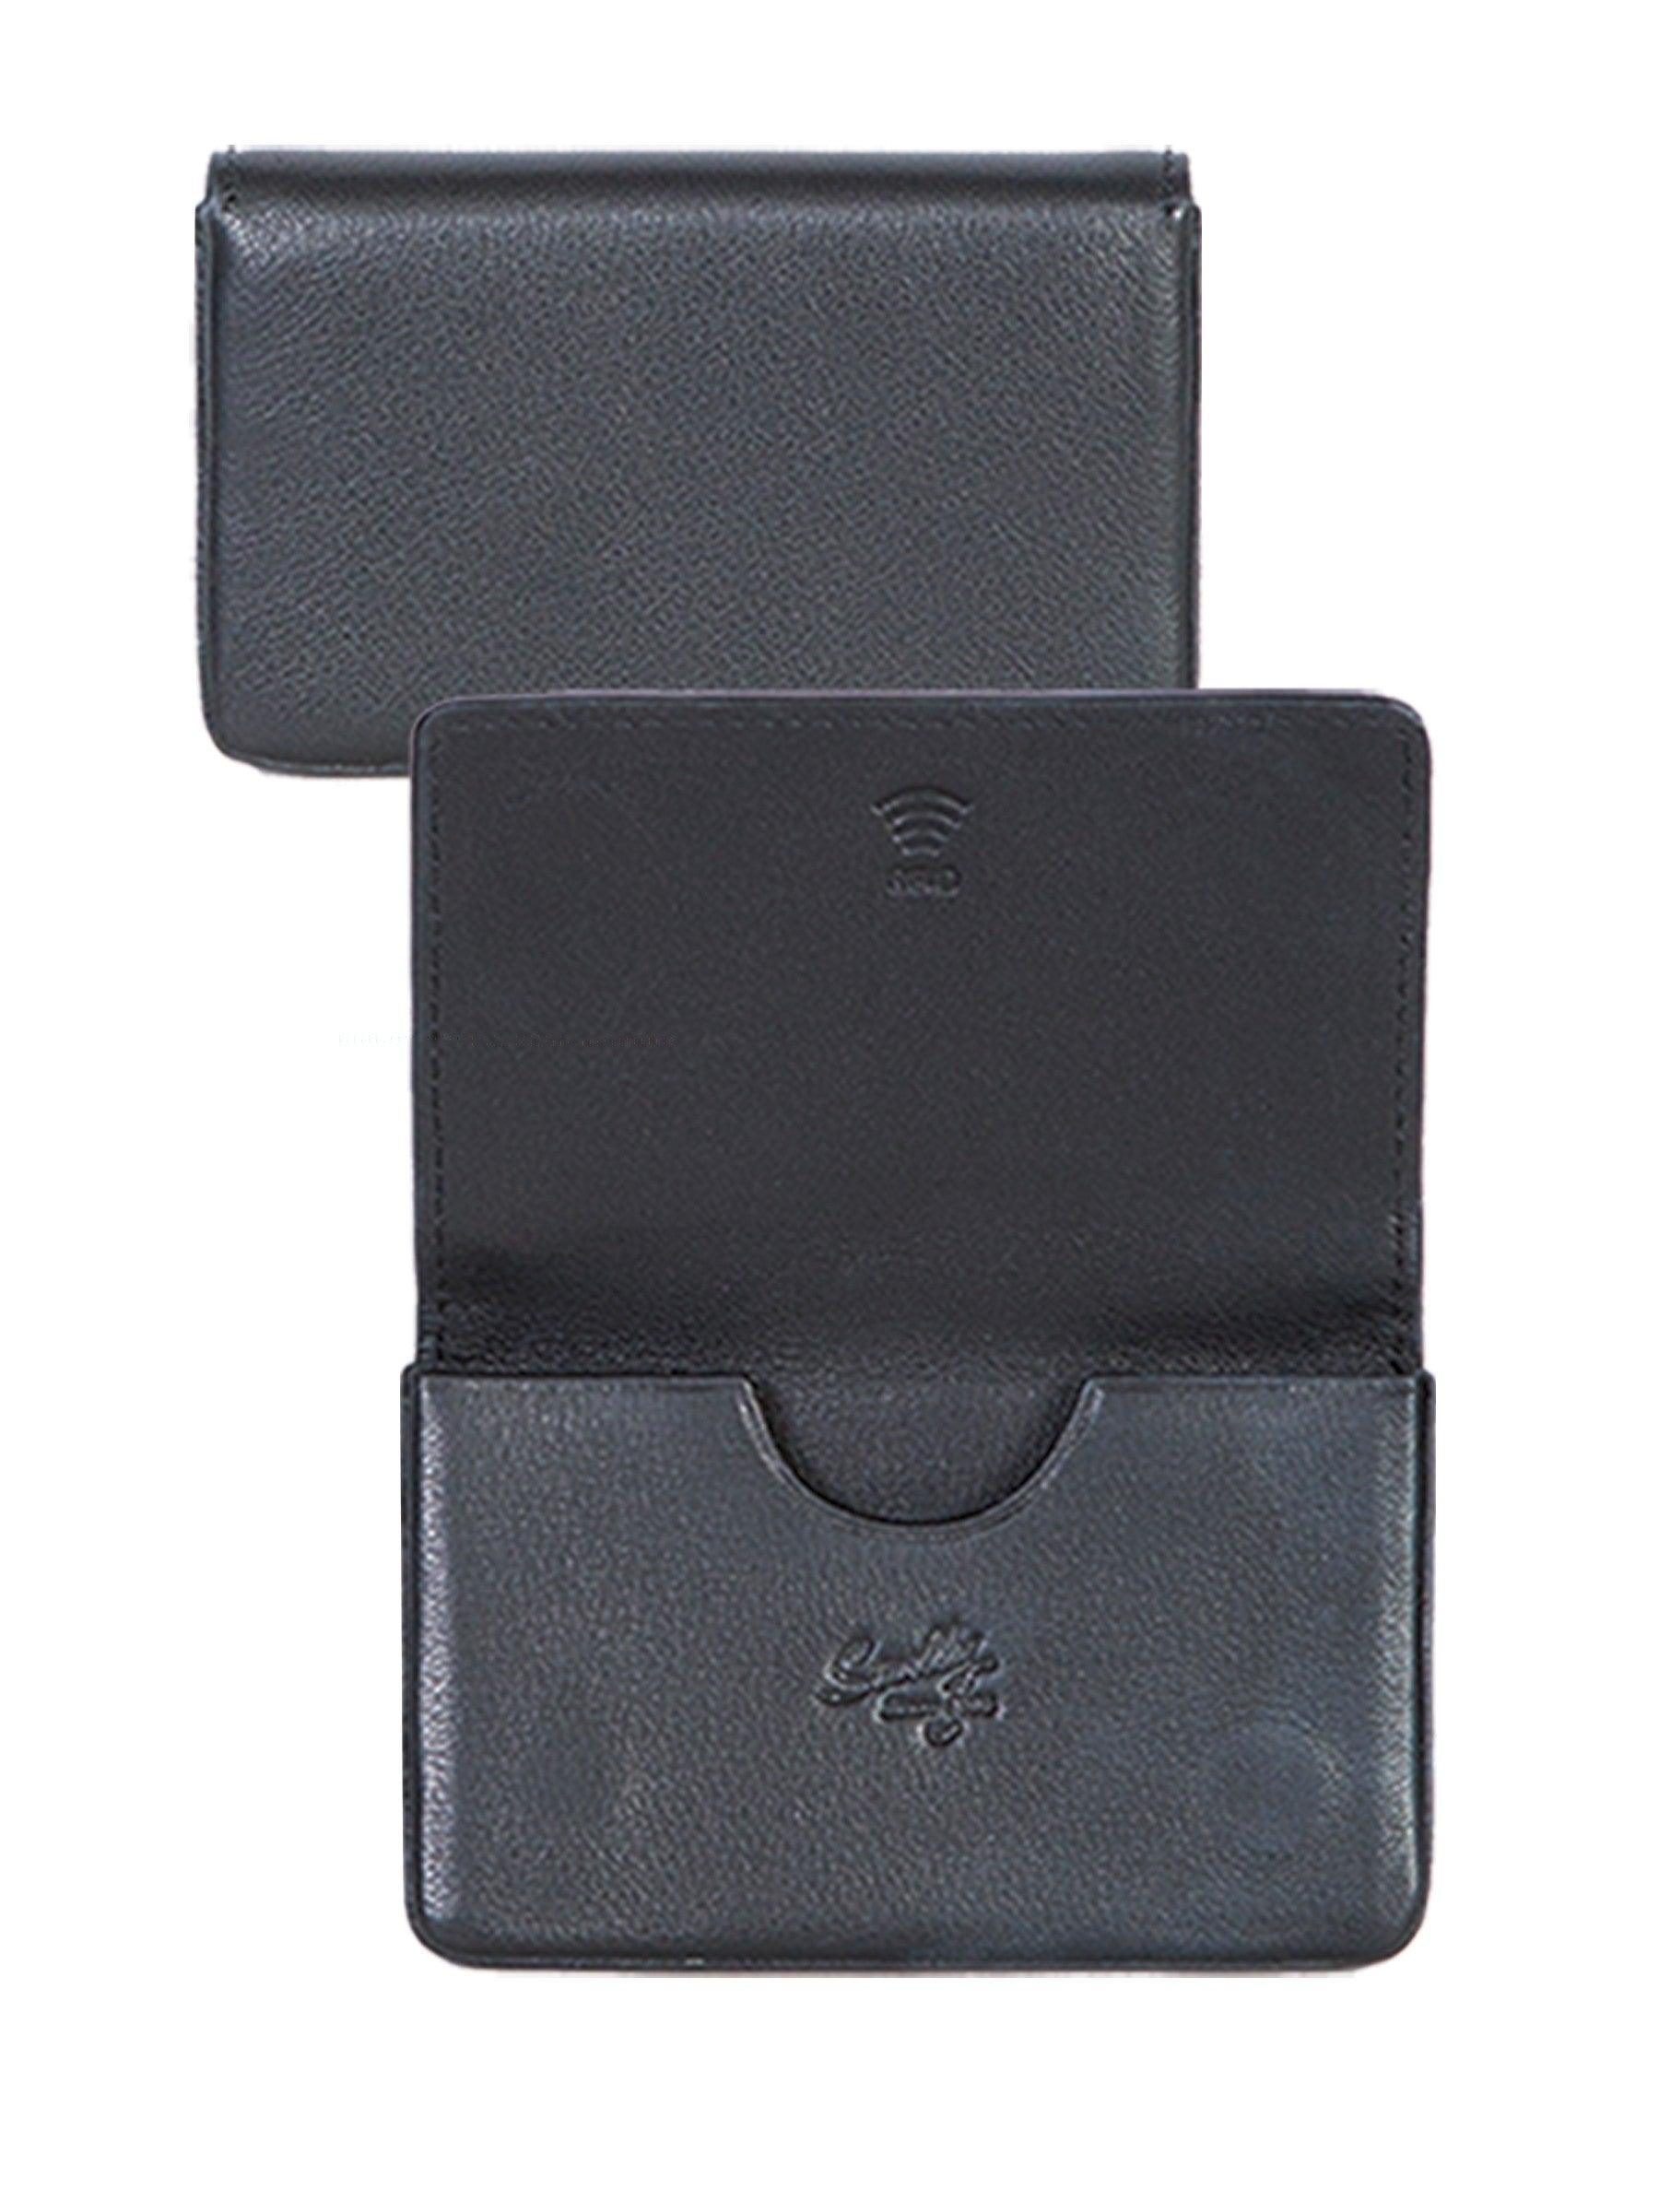 Scully Business card case - Flyclothing LLC